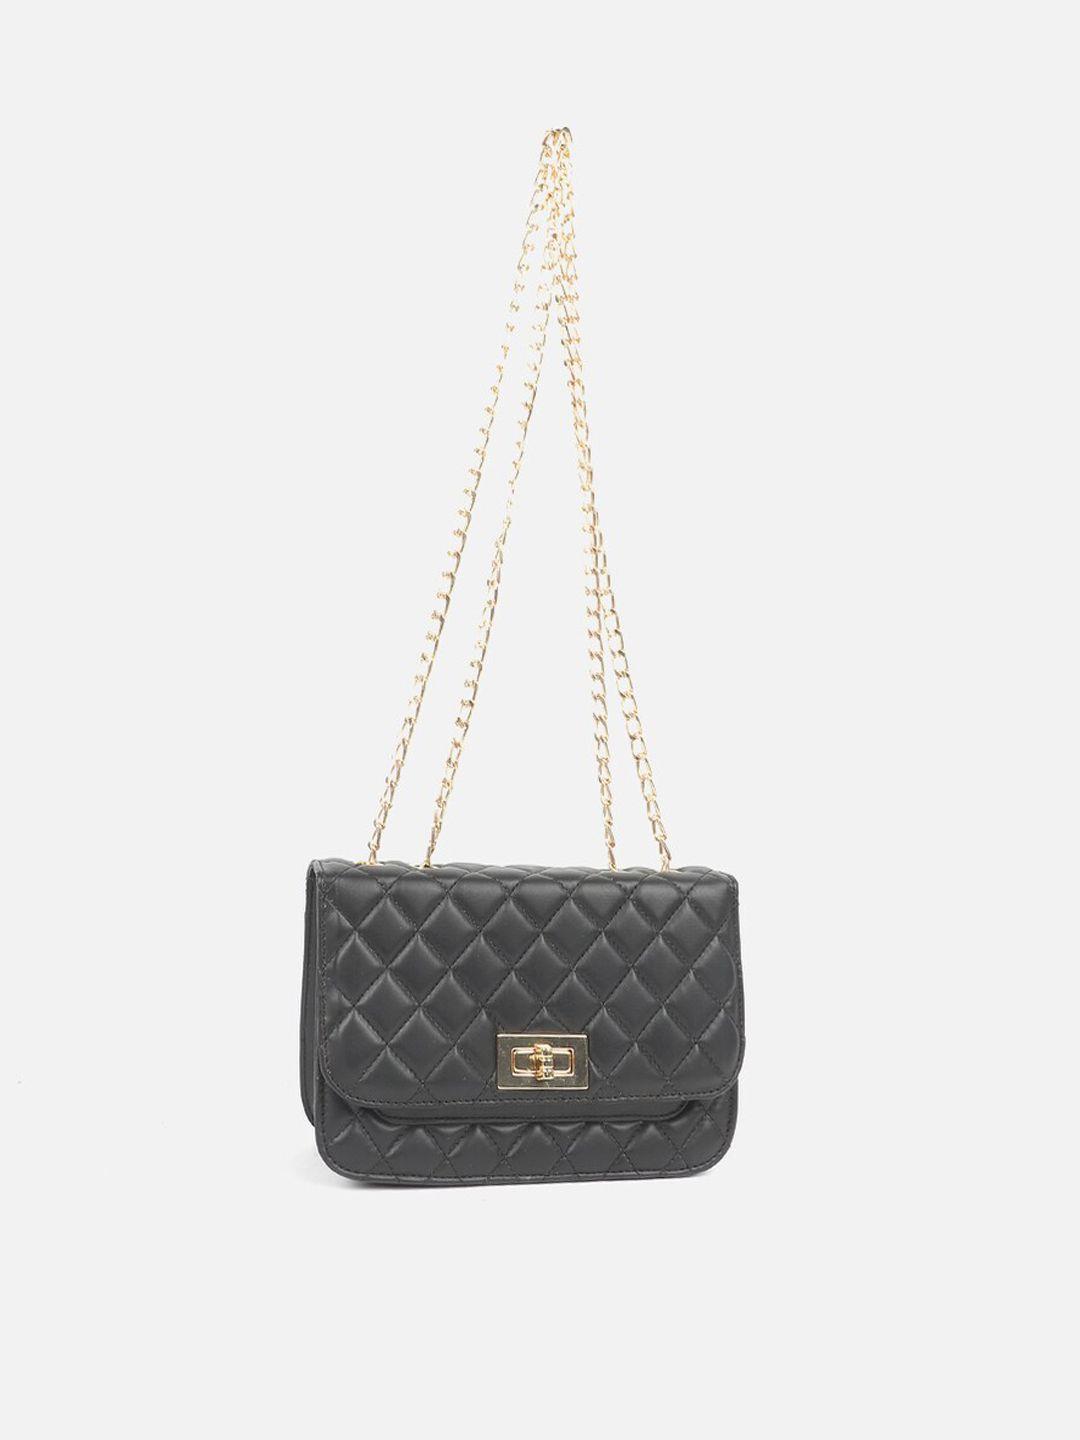 carlton-london-textured-quilted-structured-sling-bag